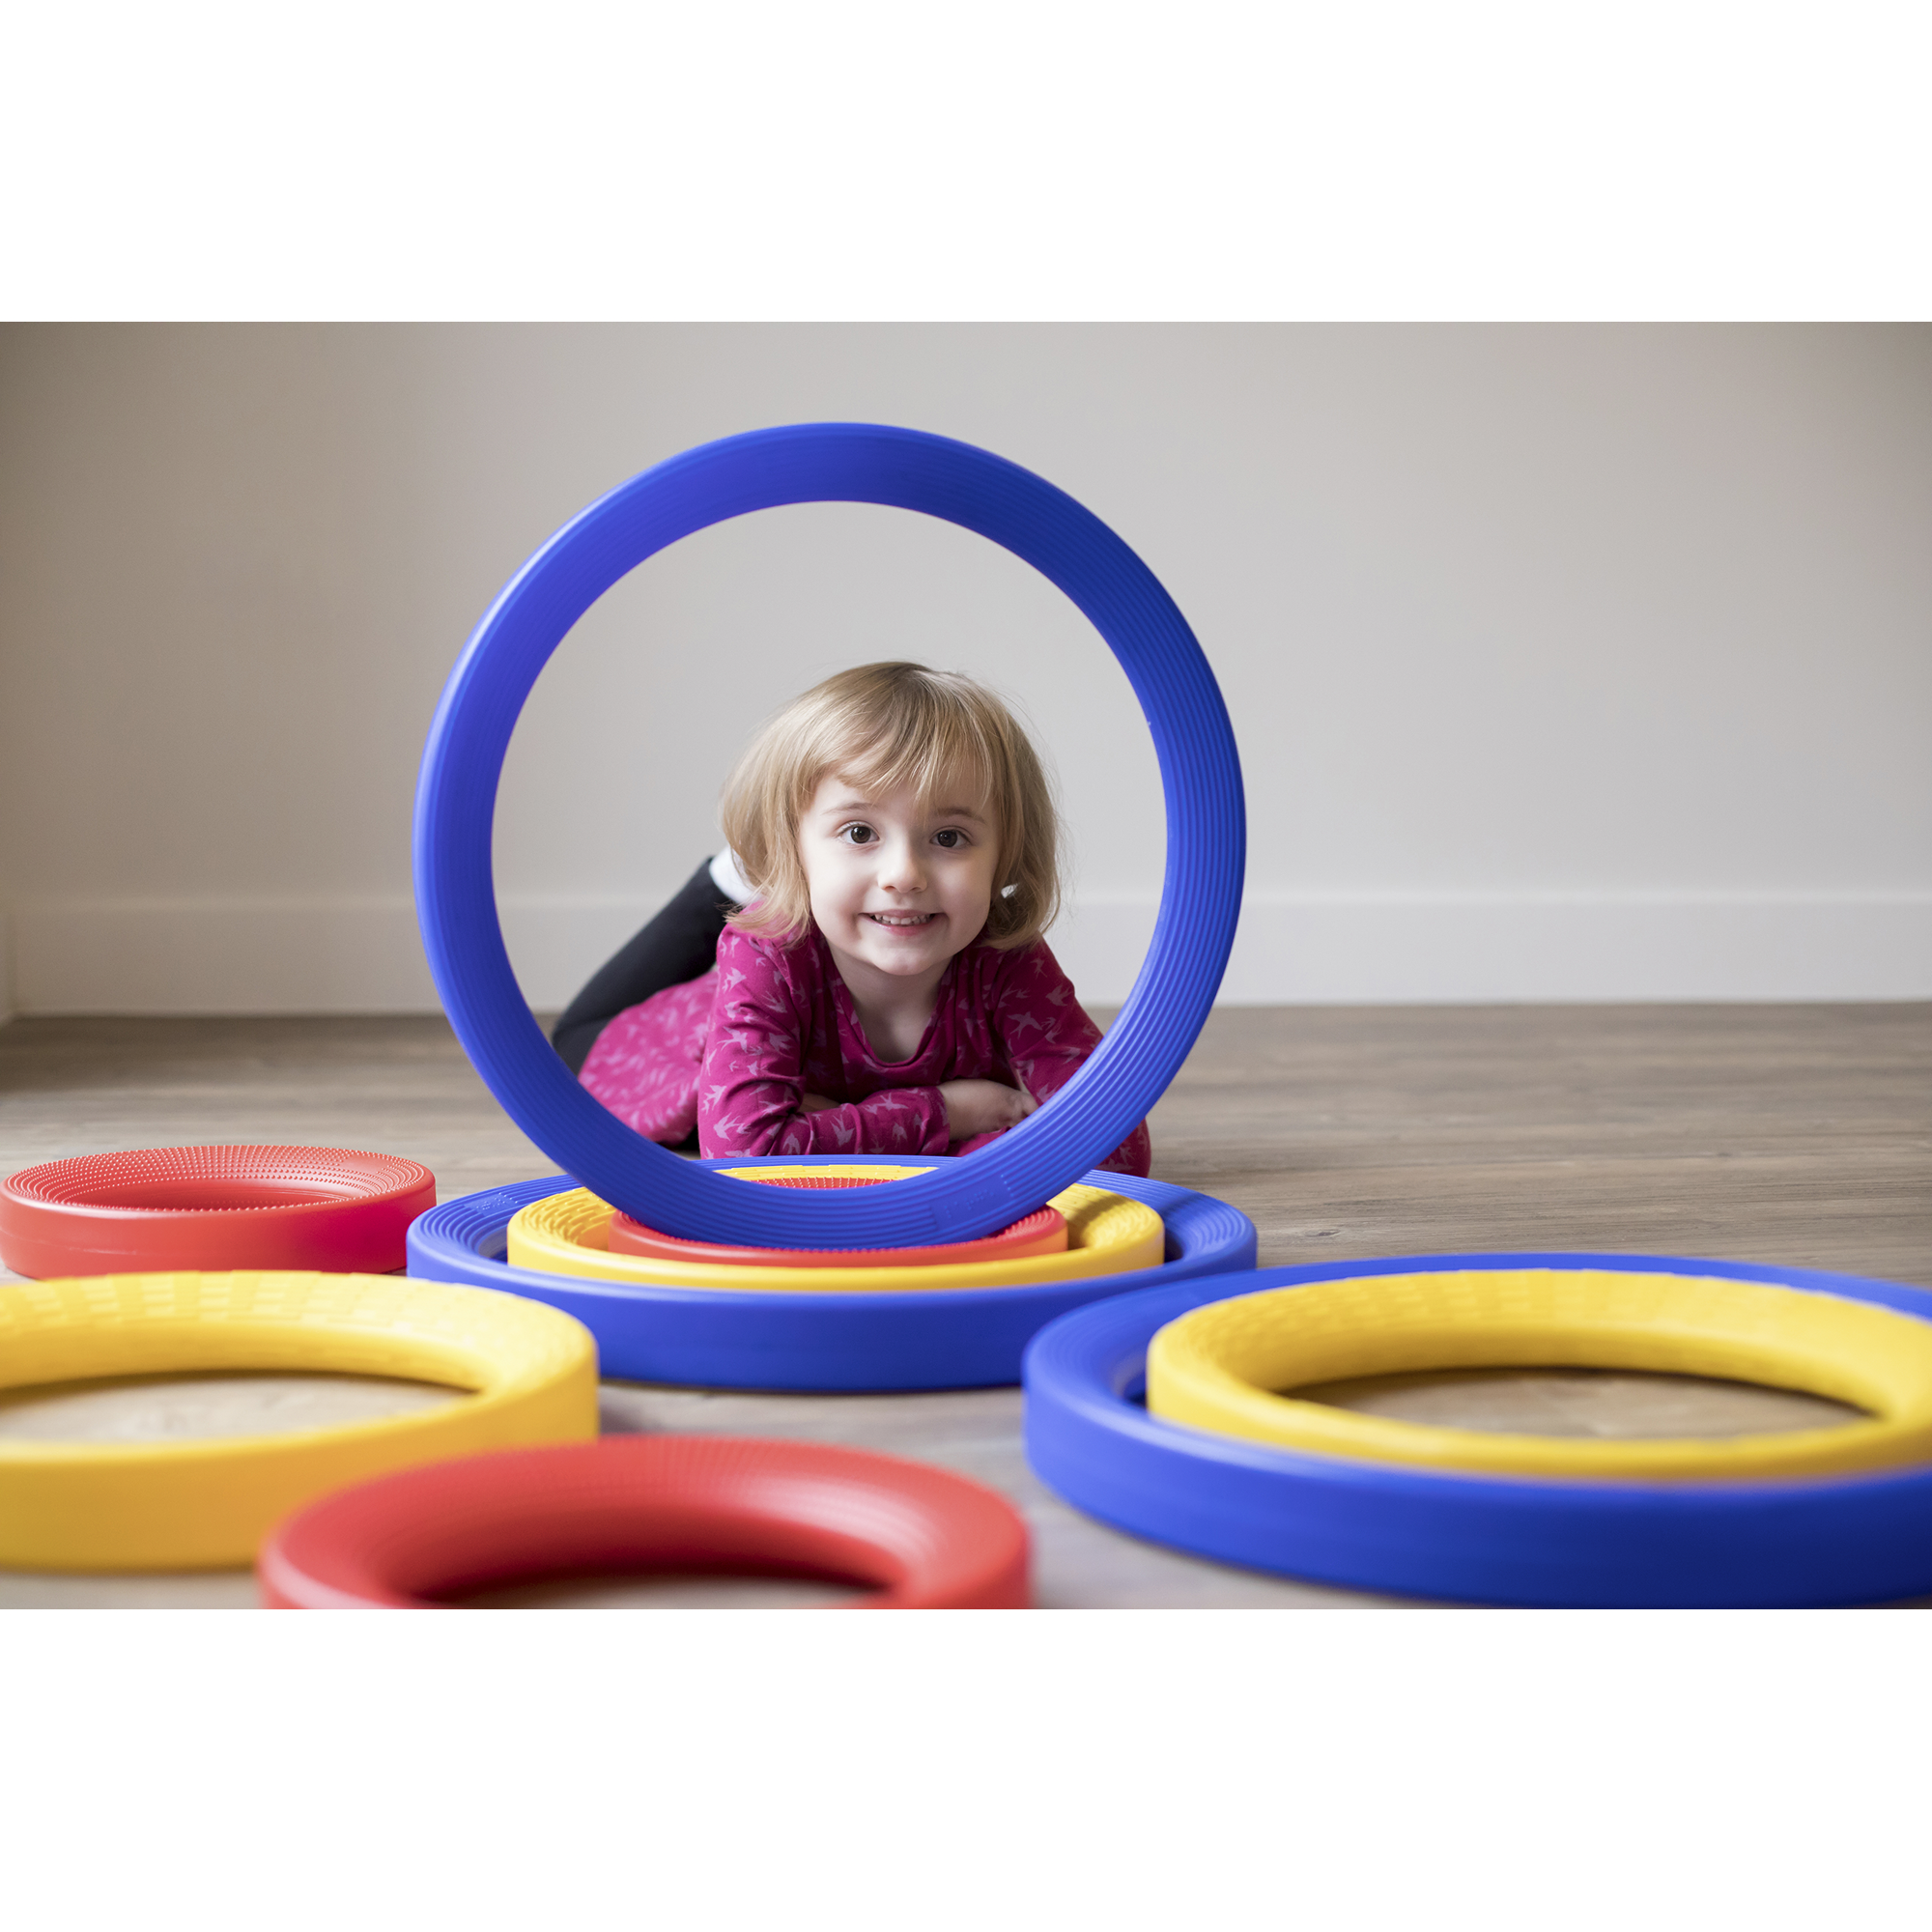 rolling rings sensory toy